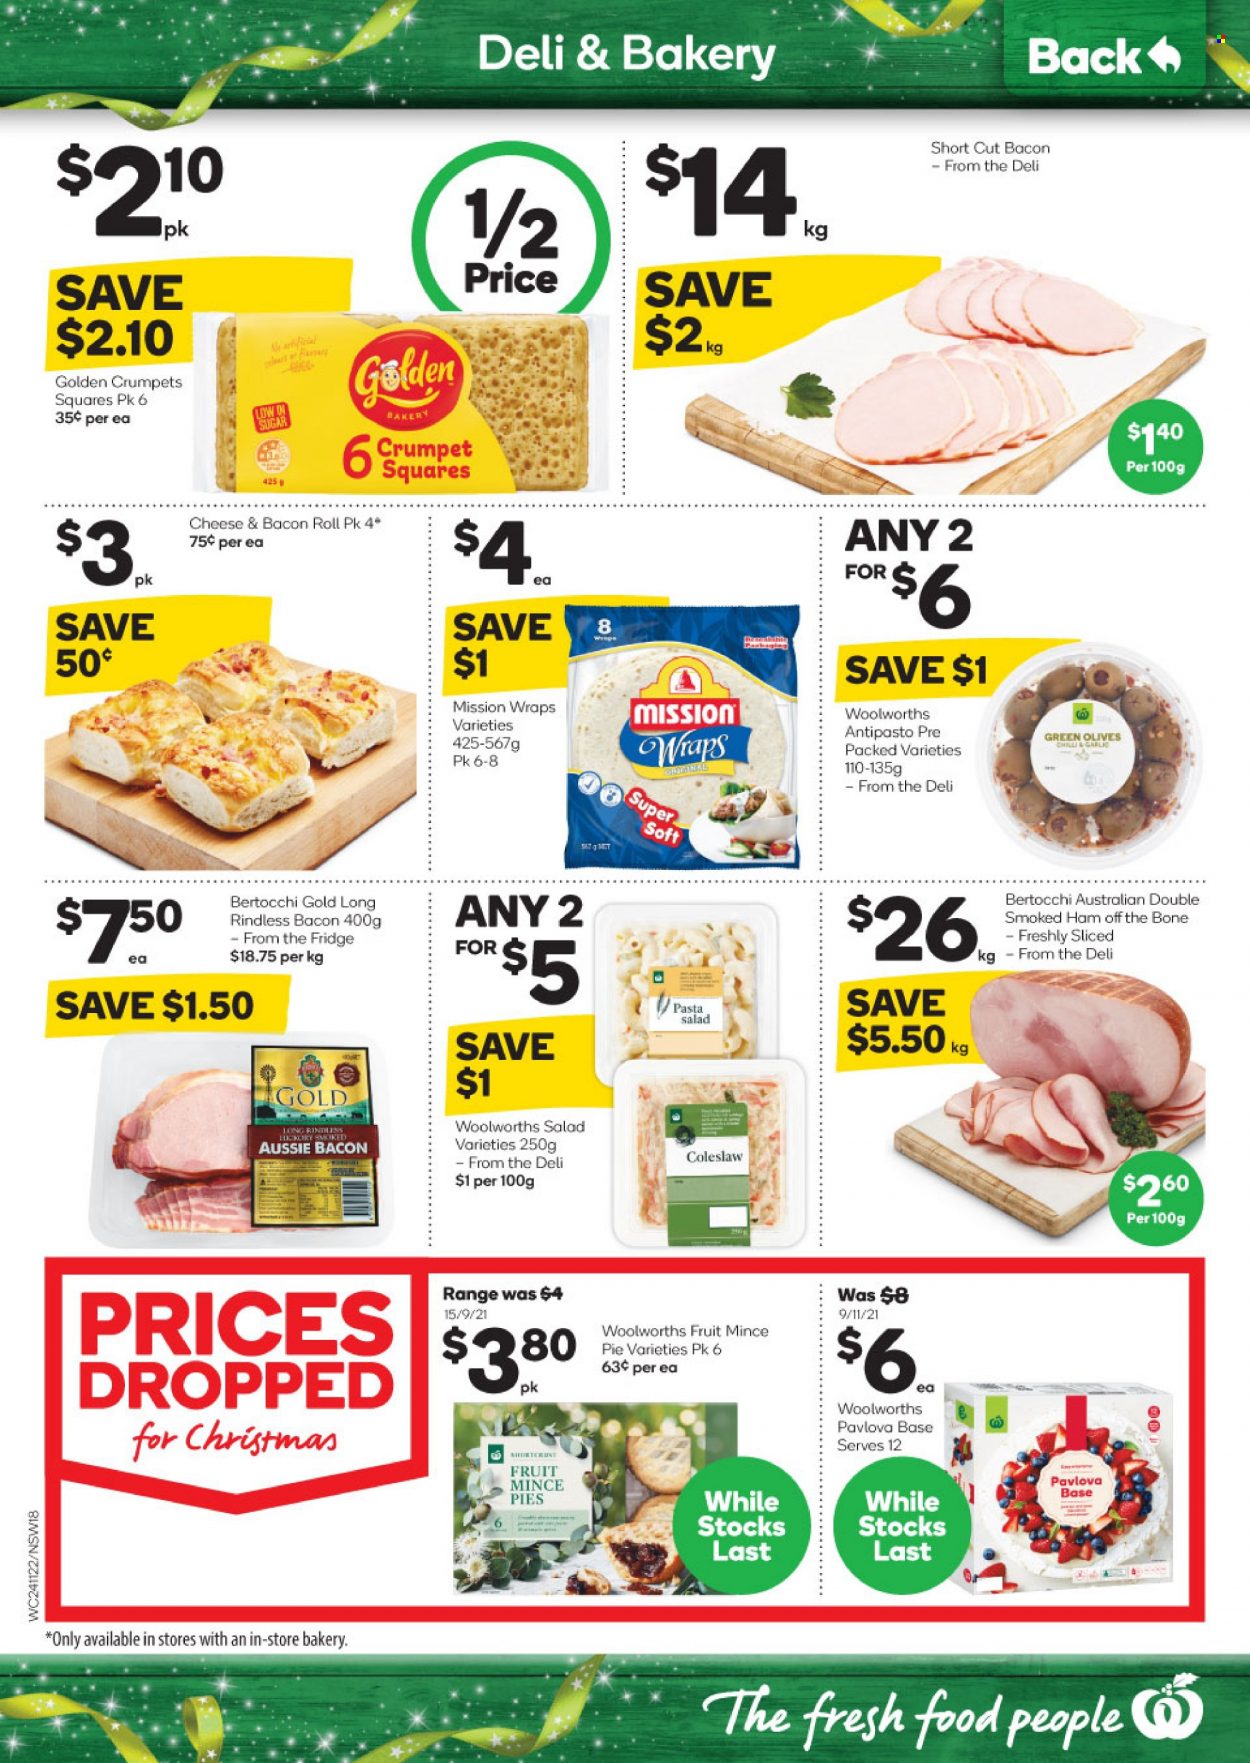 thumbnail - Woolworths Catalogue - 24 Nov 2021 - 30 Nov 2021 - Sales products - crumpets, wraps, coleslaw, pasta, bacon, ham, smoked ham, ham off the bone, pasta salad, olives, Aussie. Page 18.